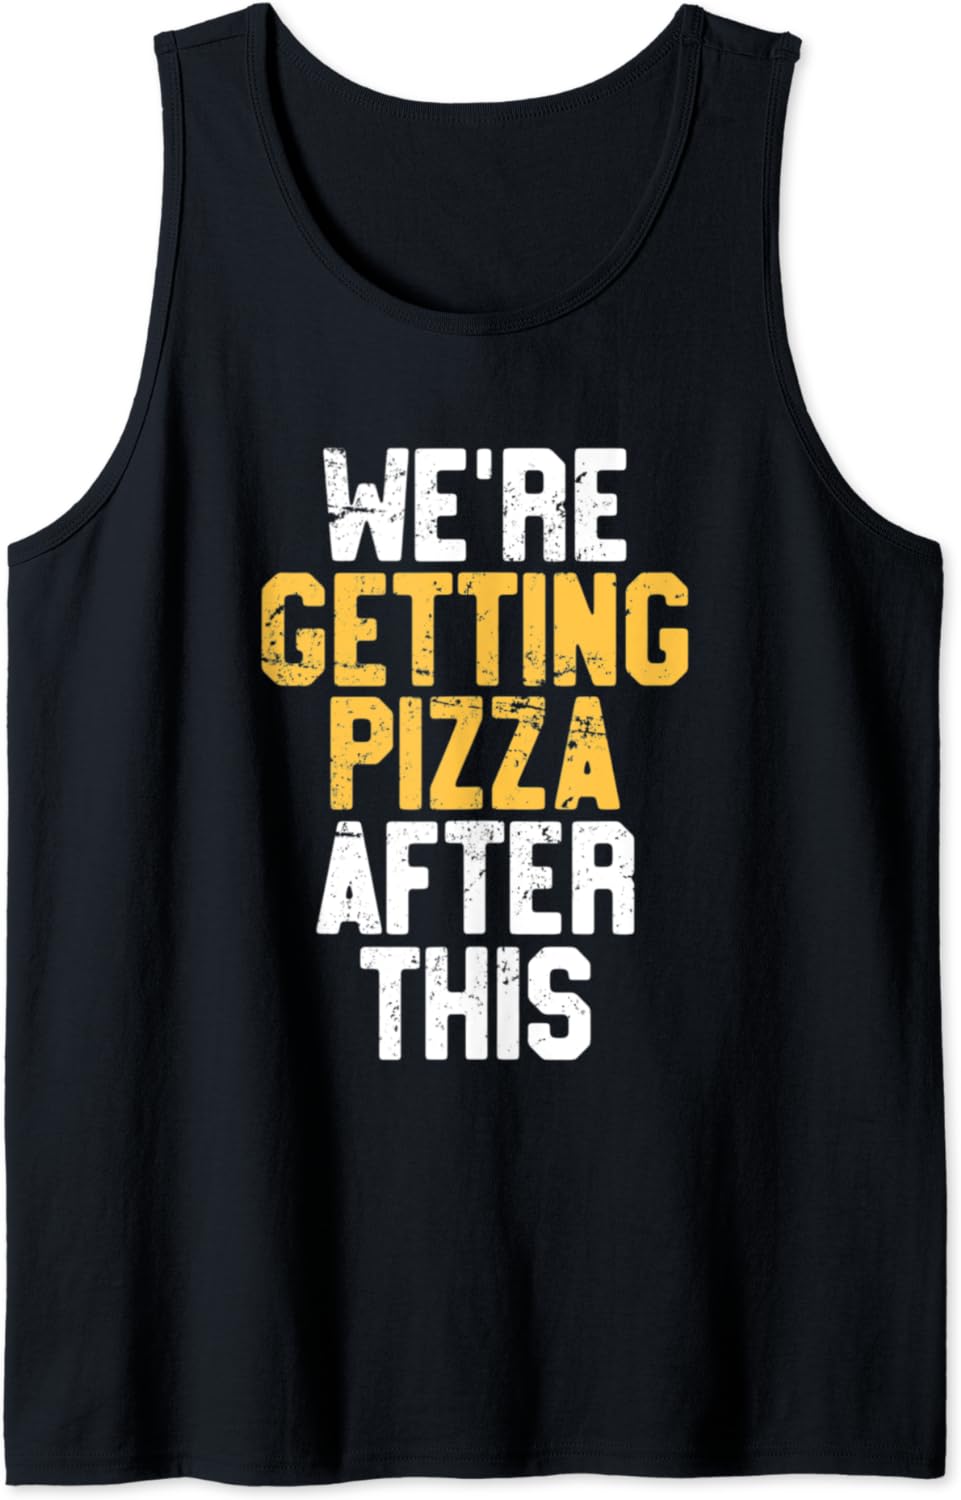 Buy We're Getting Pizza After This, Funny Workout Tank Top Online at Lowest  Price in Ubuy Botswana. B0B7TT6G18